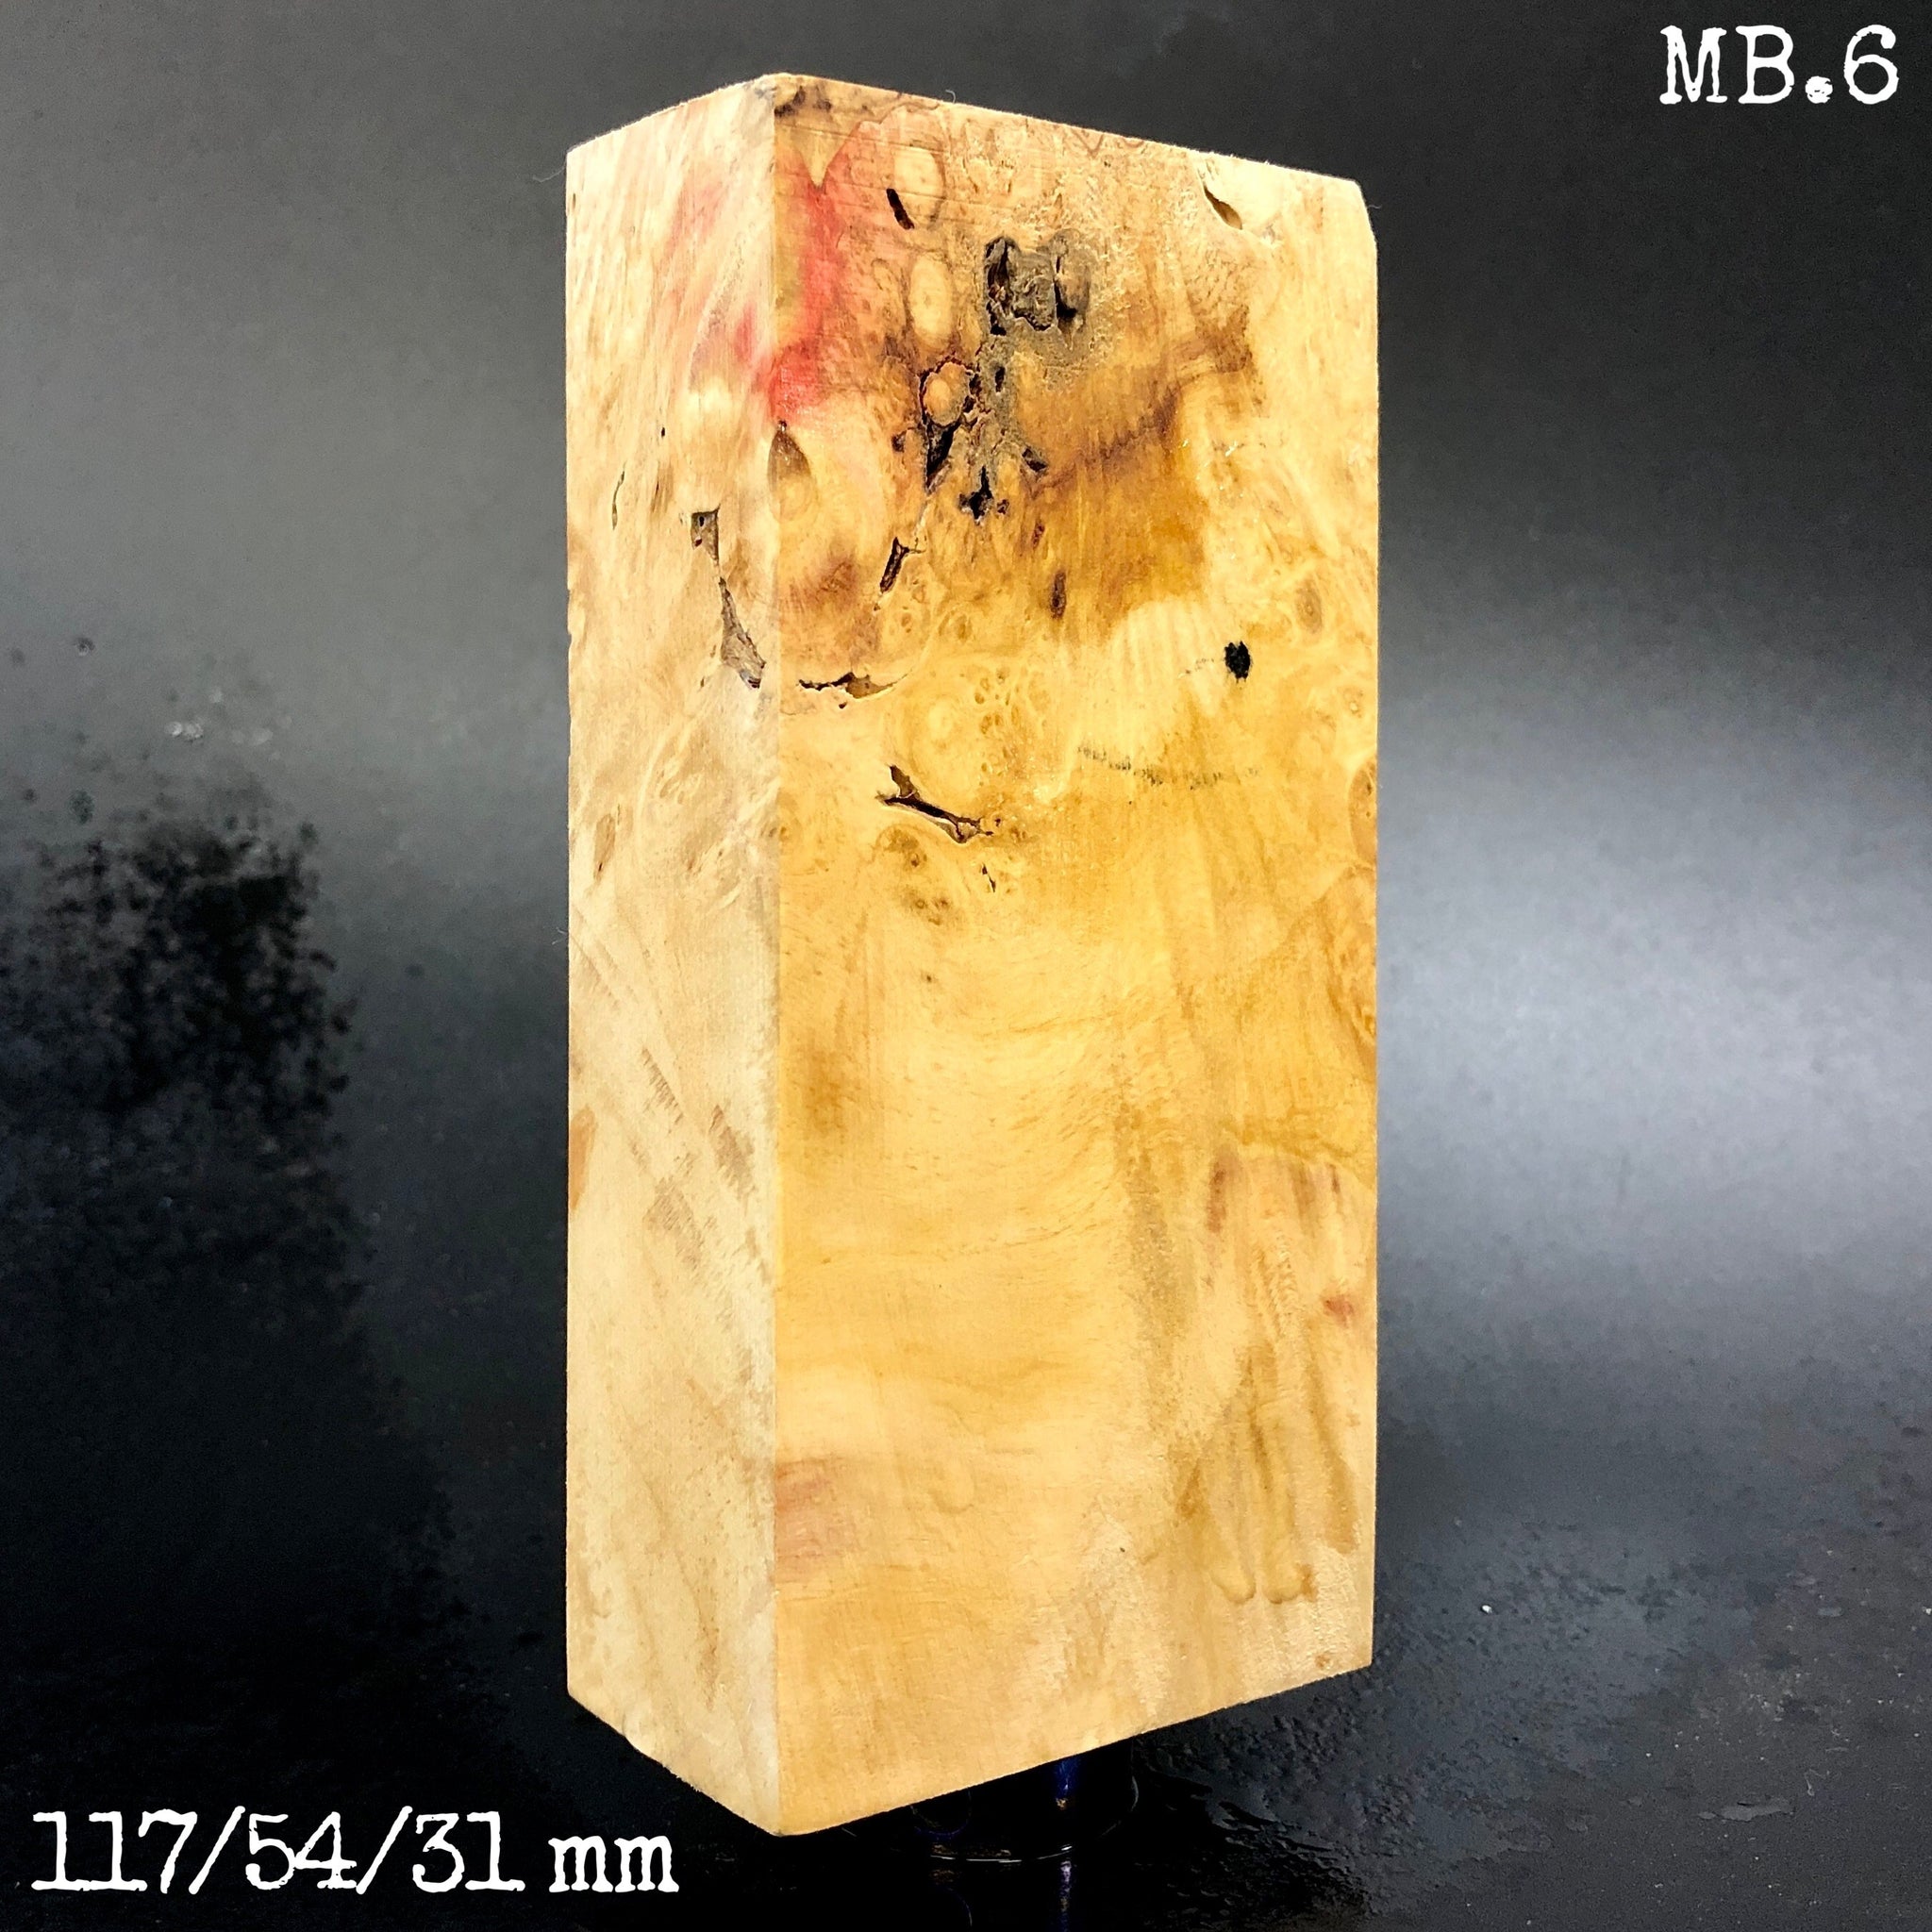 Buy Maple Burl, Wood Blank for Crafting, Woodworking, Turning, DIY.